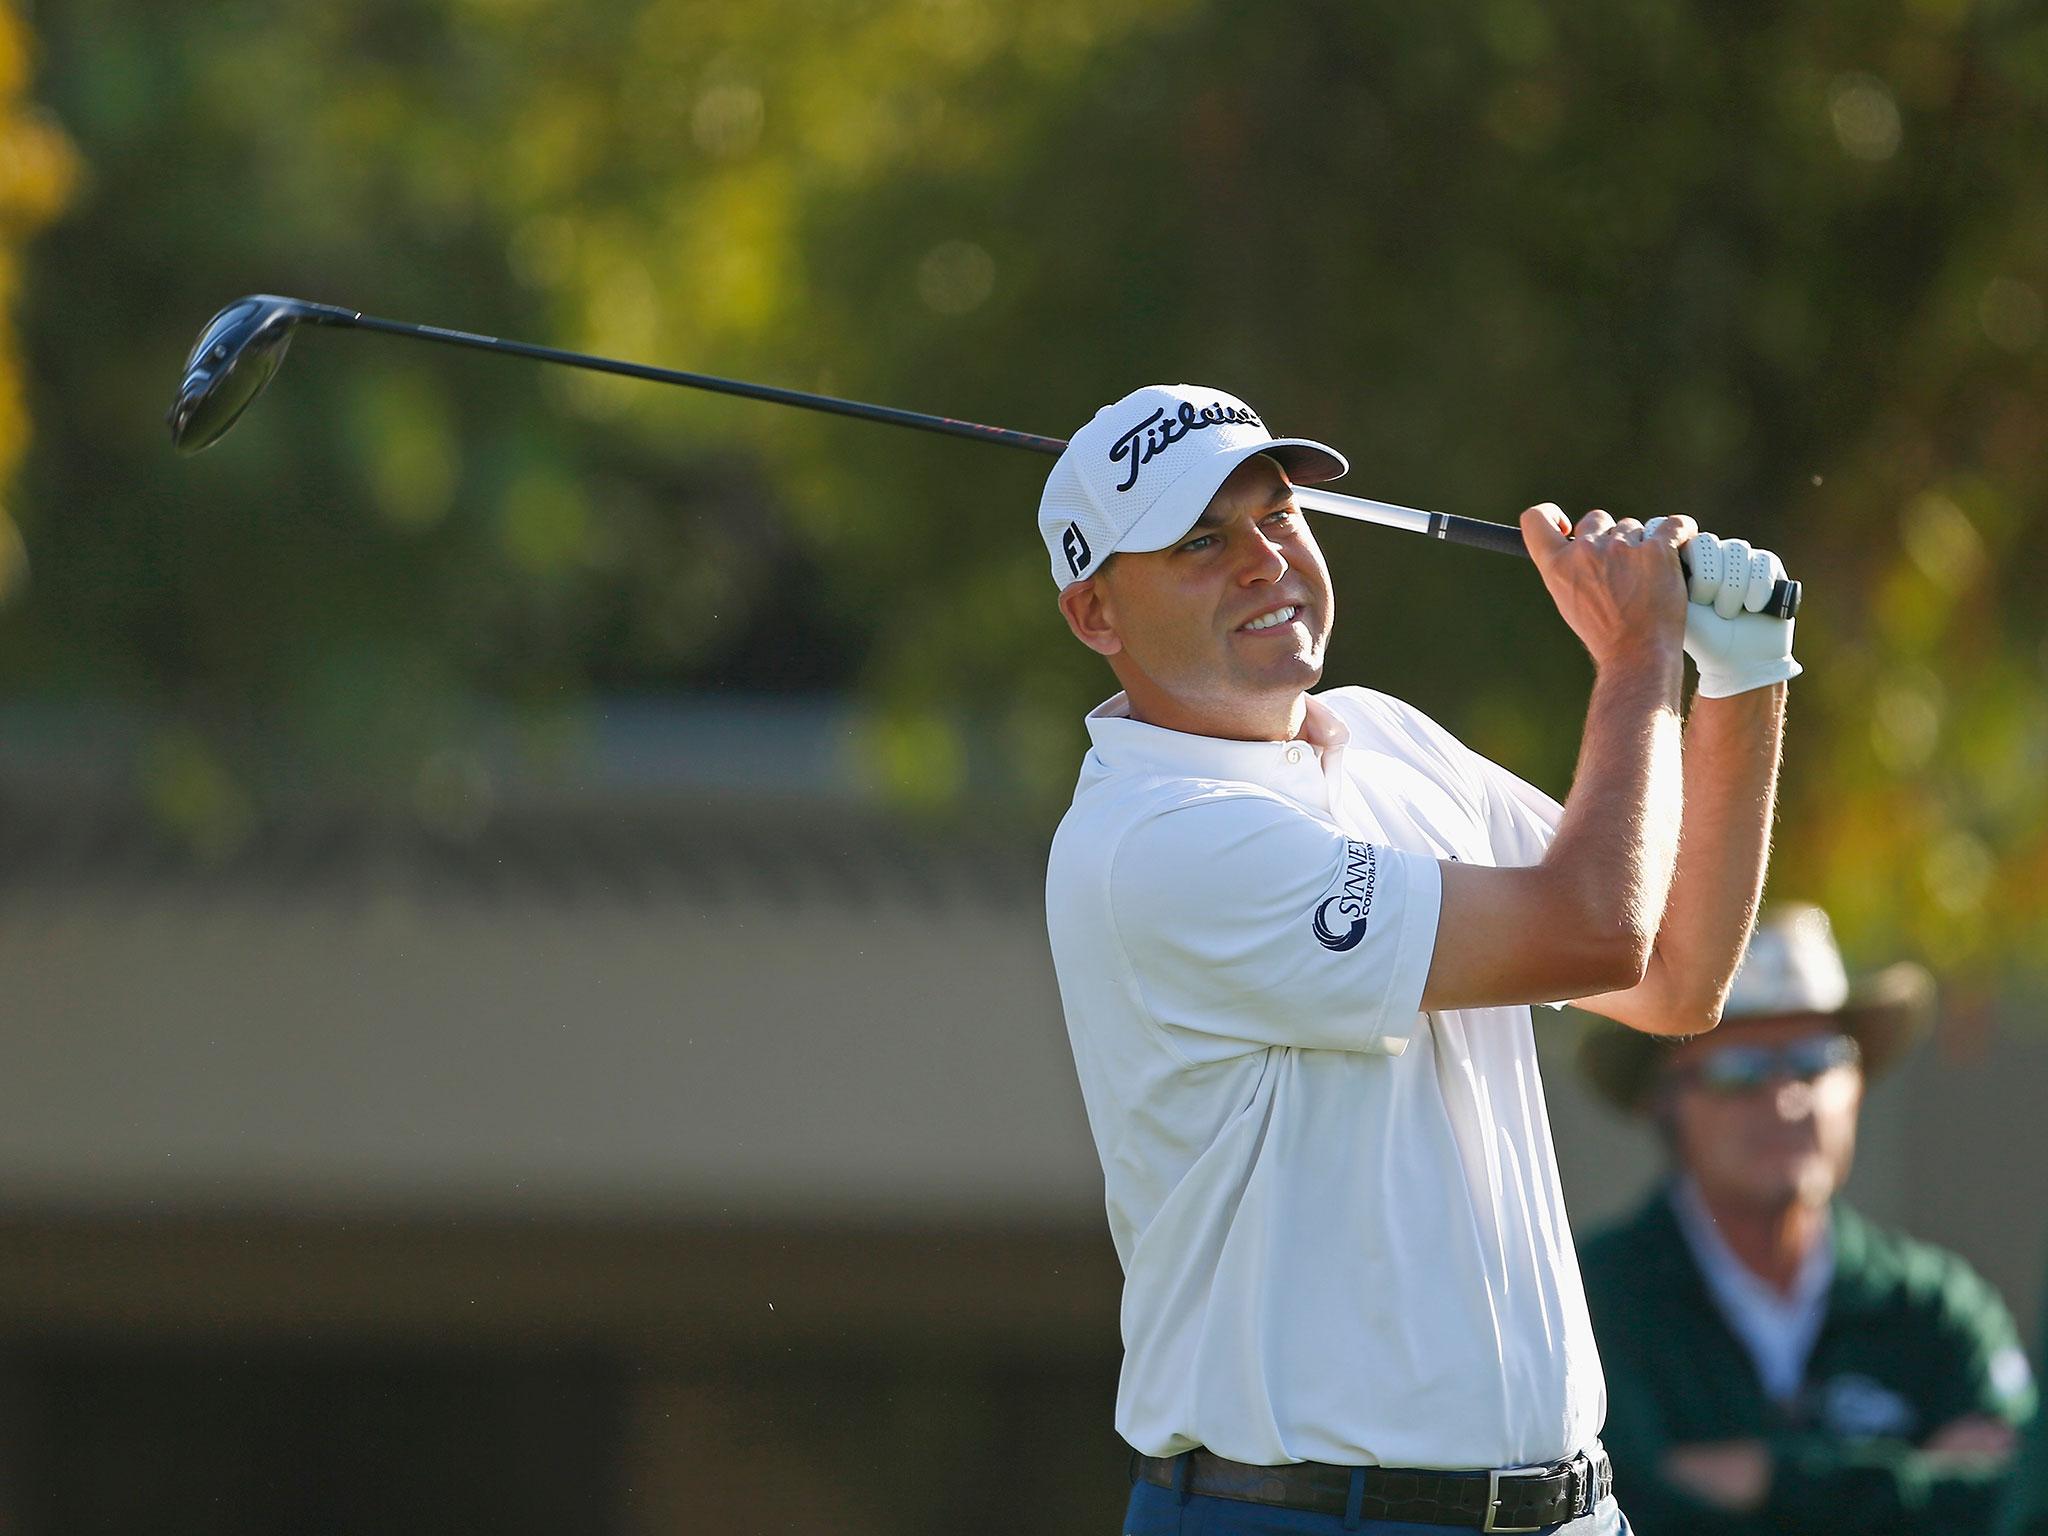 Bill Haas avoided sustaining any serious injuries in the crash